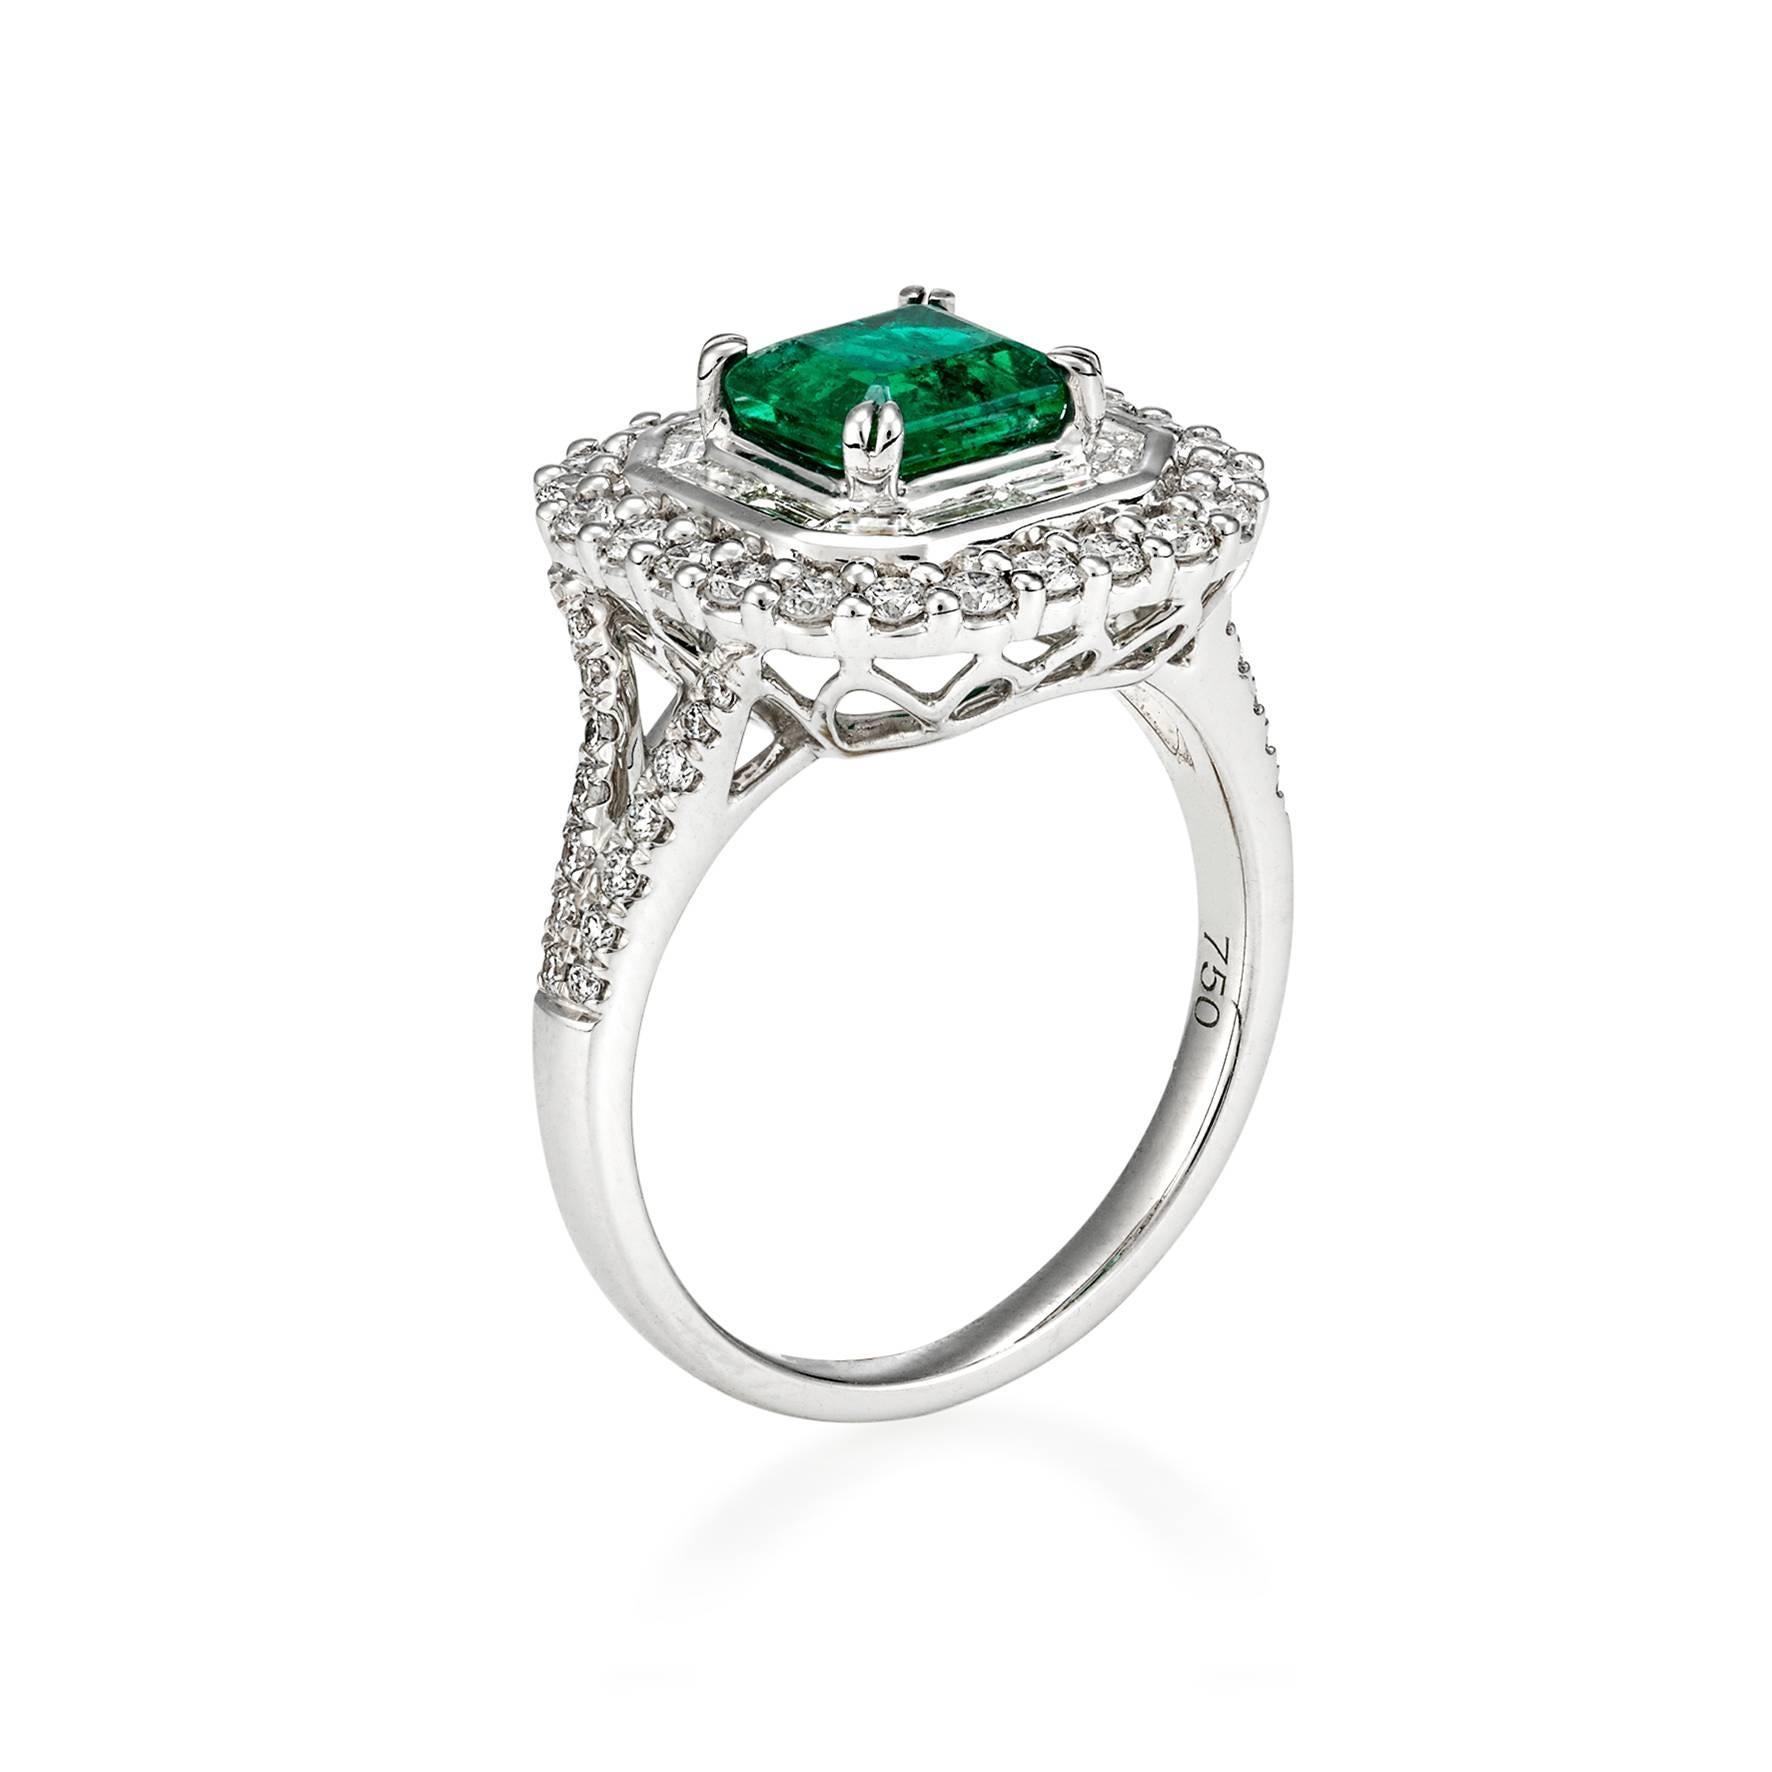 This spectacular Cocktail Ring features a 2.40ct Emerald Cut Emerald, surrounded with divine fine White Baguette Diamonds (totalling 0.746ct) set in 18ct White Gold.

Resizing available free of charge (depending on possibility).